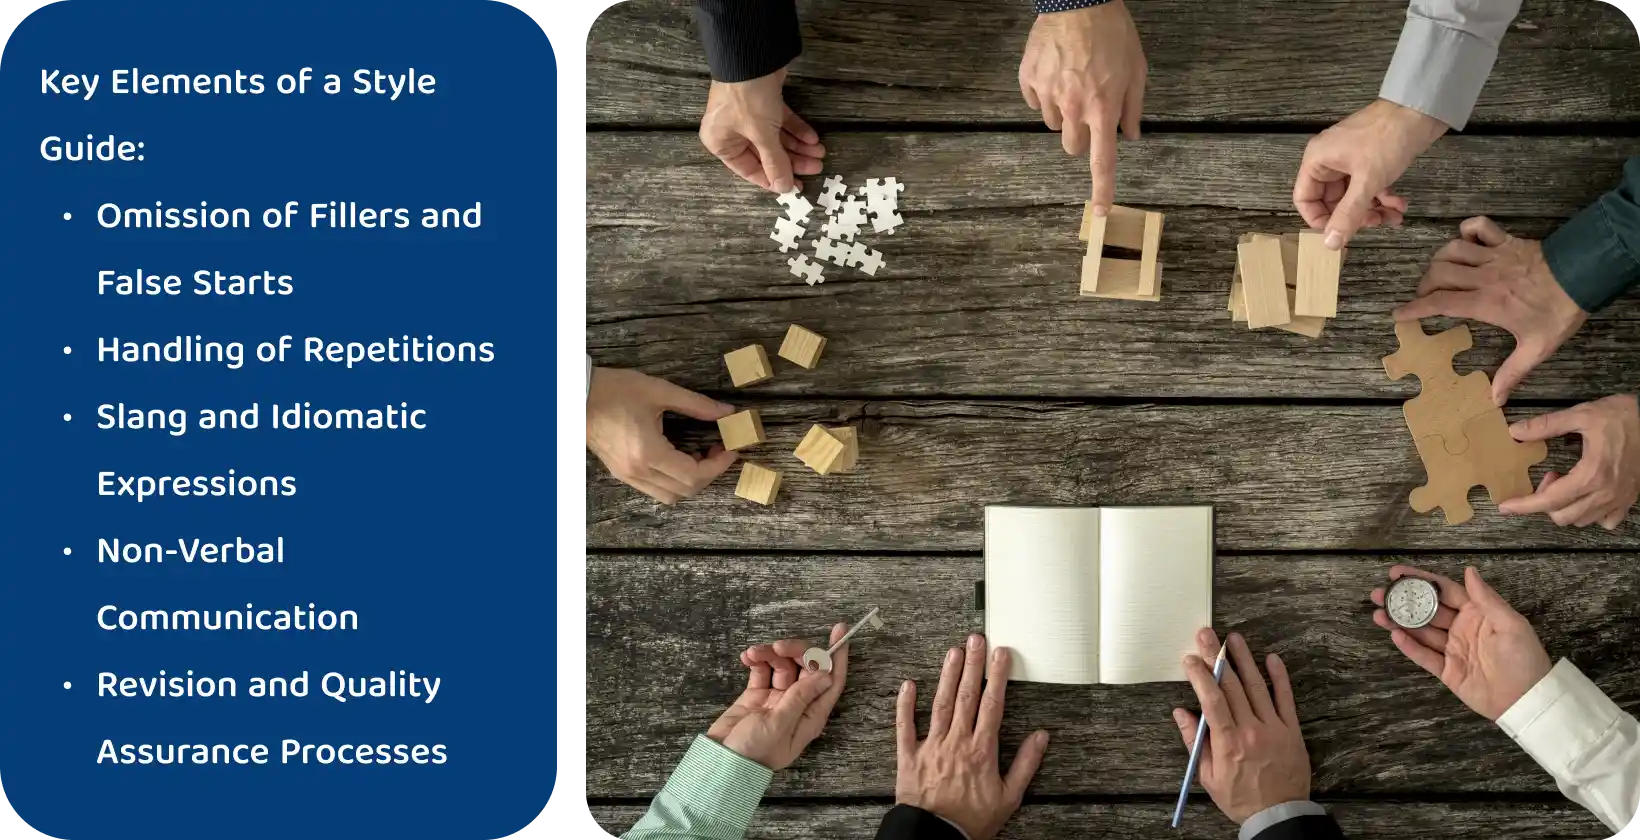 A collaborative workspace where hands assemble puzzles and wooden blocks, visualizing the key elements of a transcription guide.